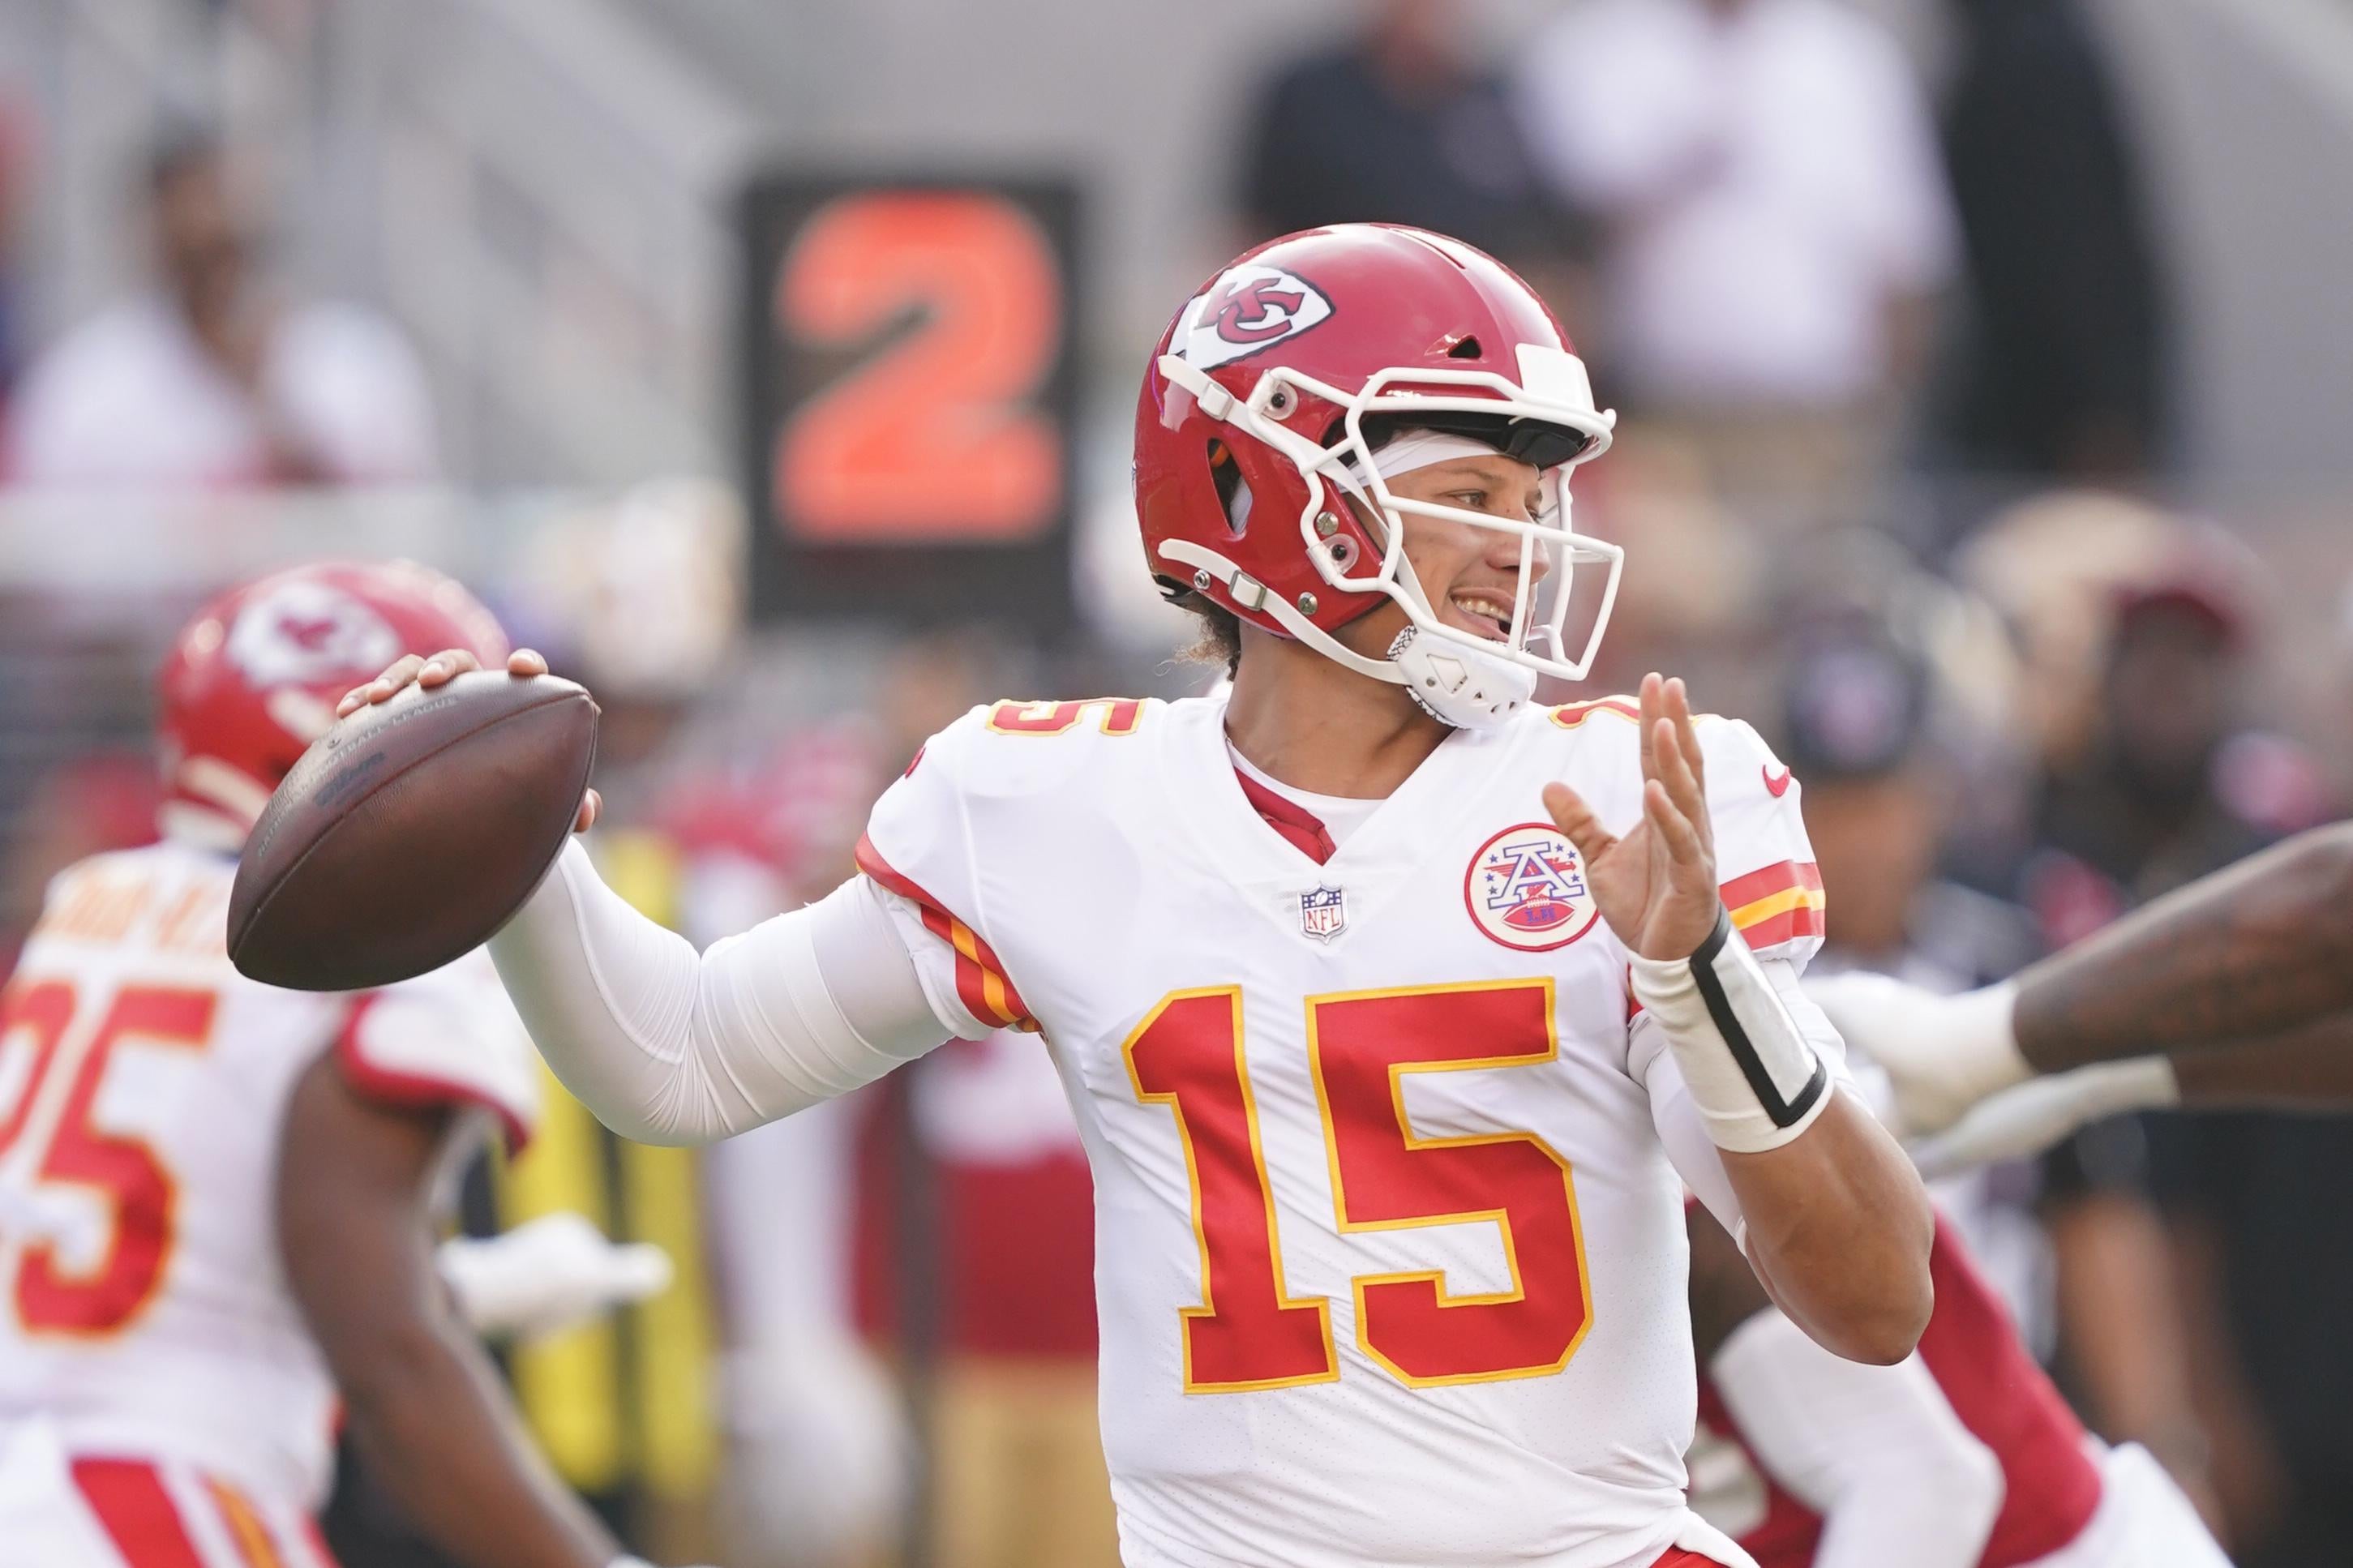 Chiefs vs. Cardinals Score: Final score, results for Friday's Week